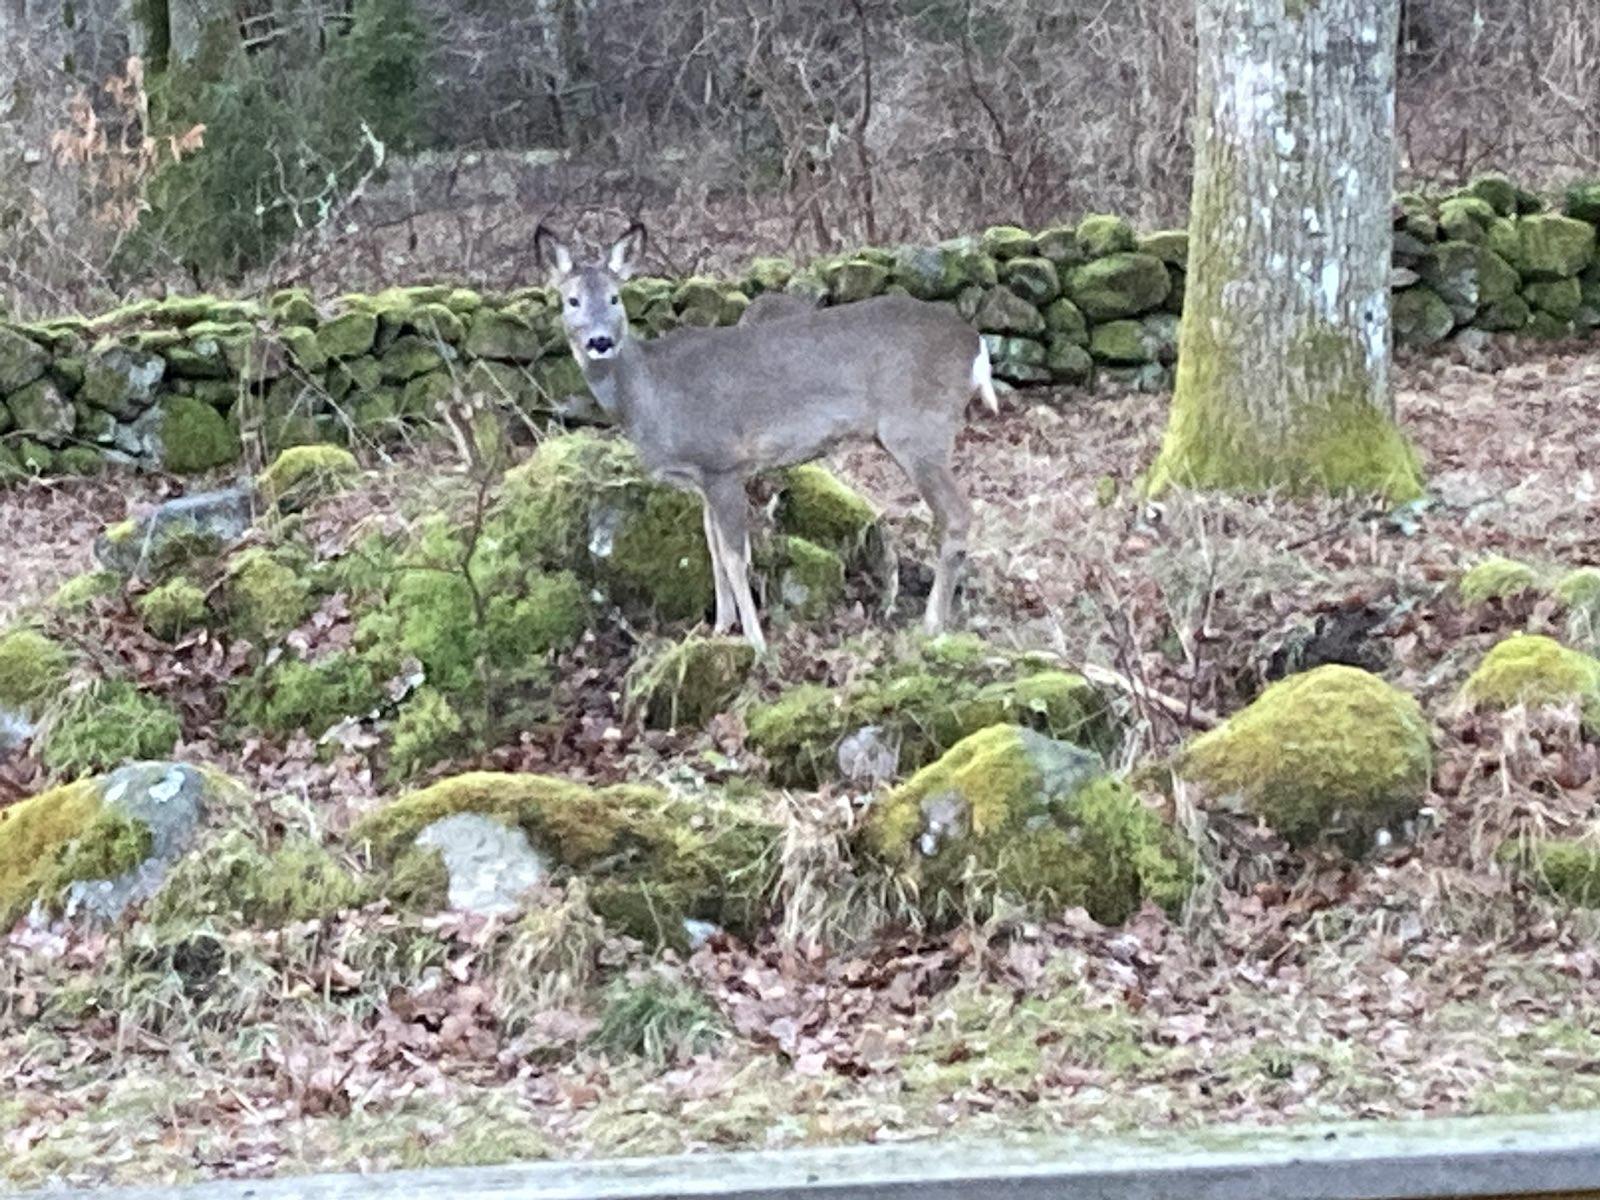 A deer (and another behind it) on a lawn with a stone formation.